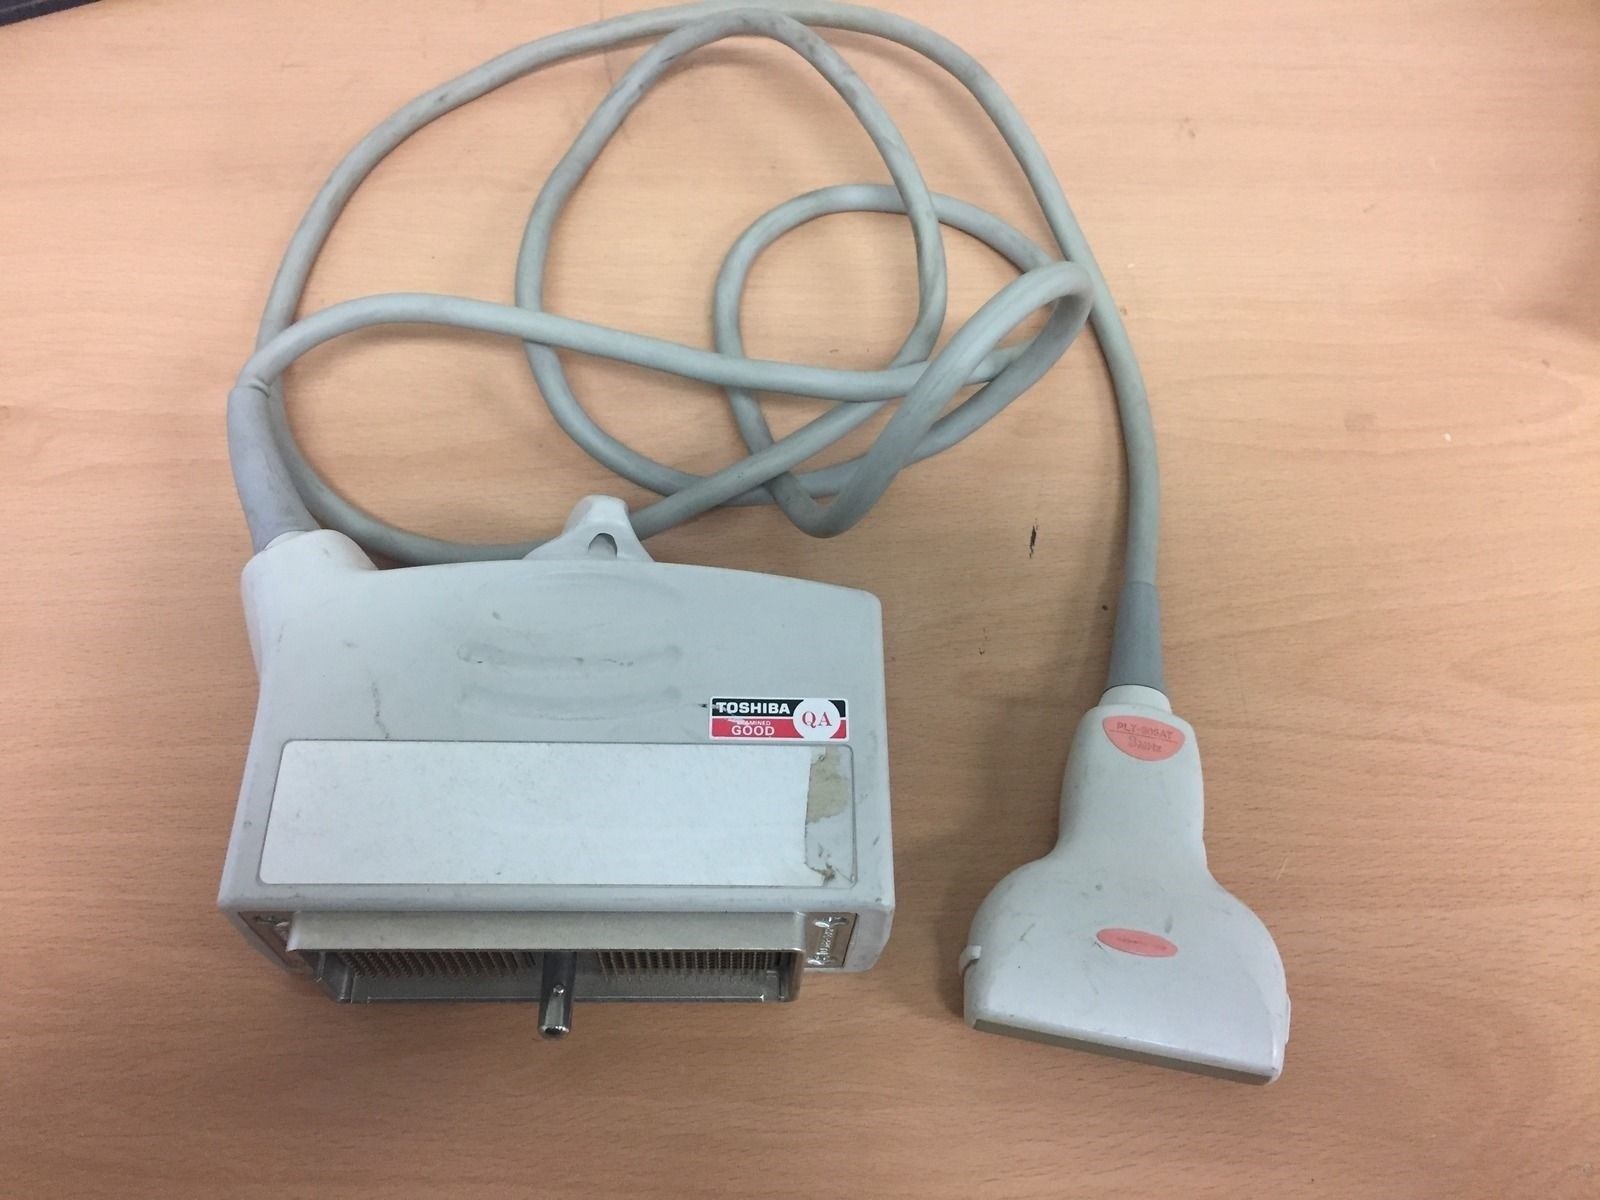 Toshiba Aplio 500 PLT-805AT 8 MHz Linear Transducer Probe for Small Parts DIAGNOSTIC ULTRASOUND MACHINES FOR SALE